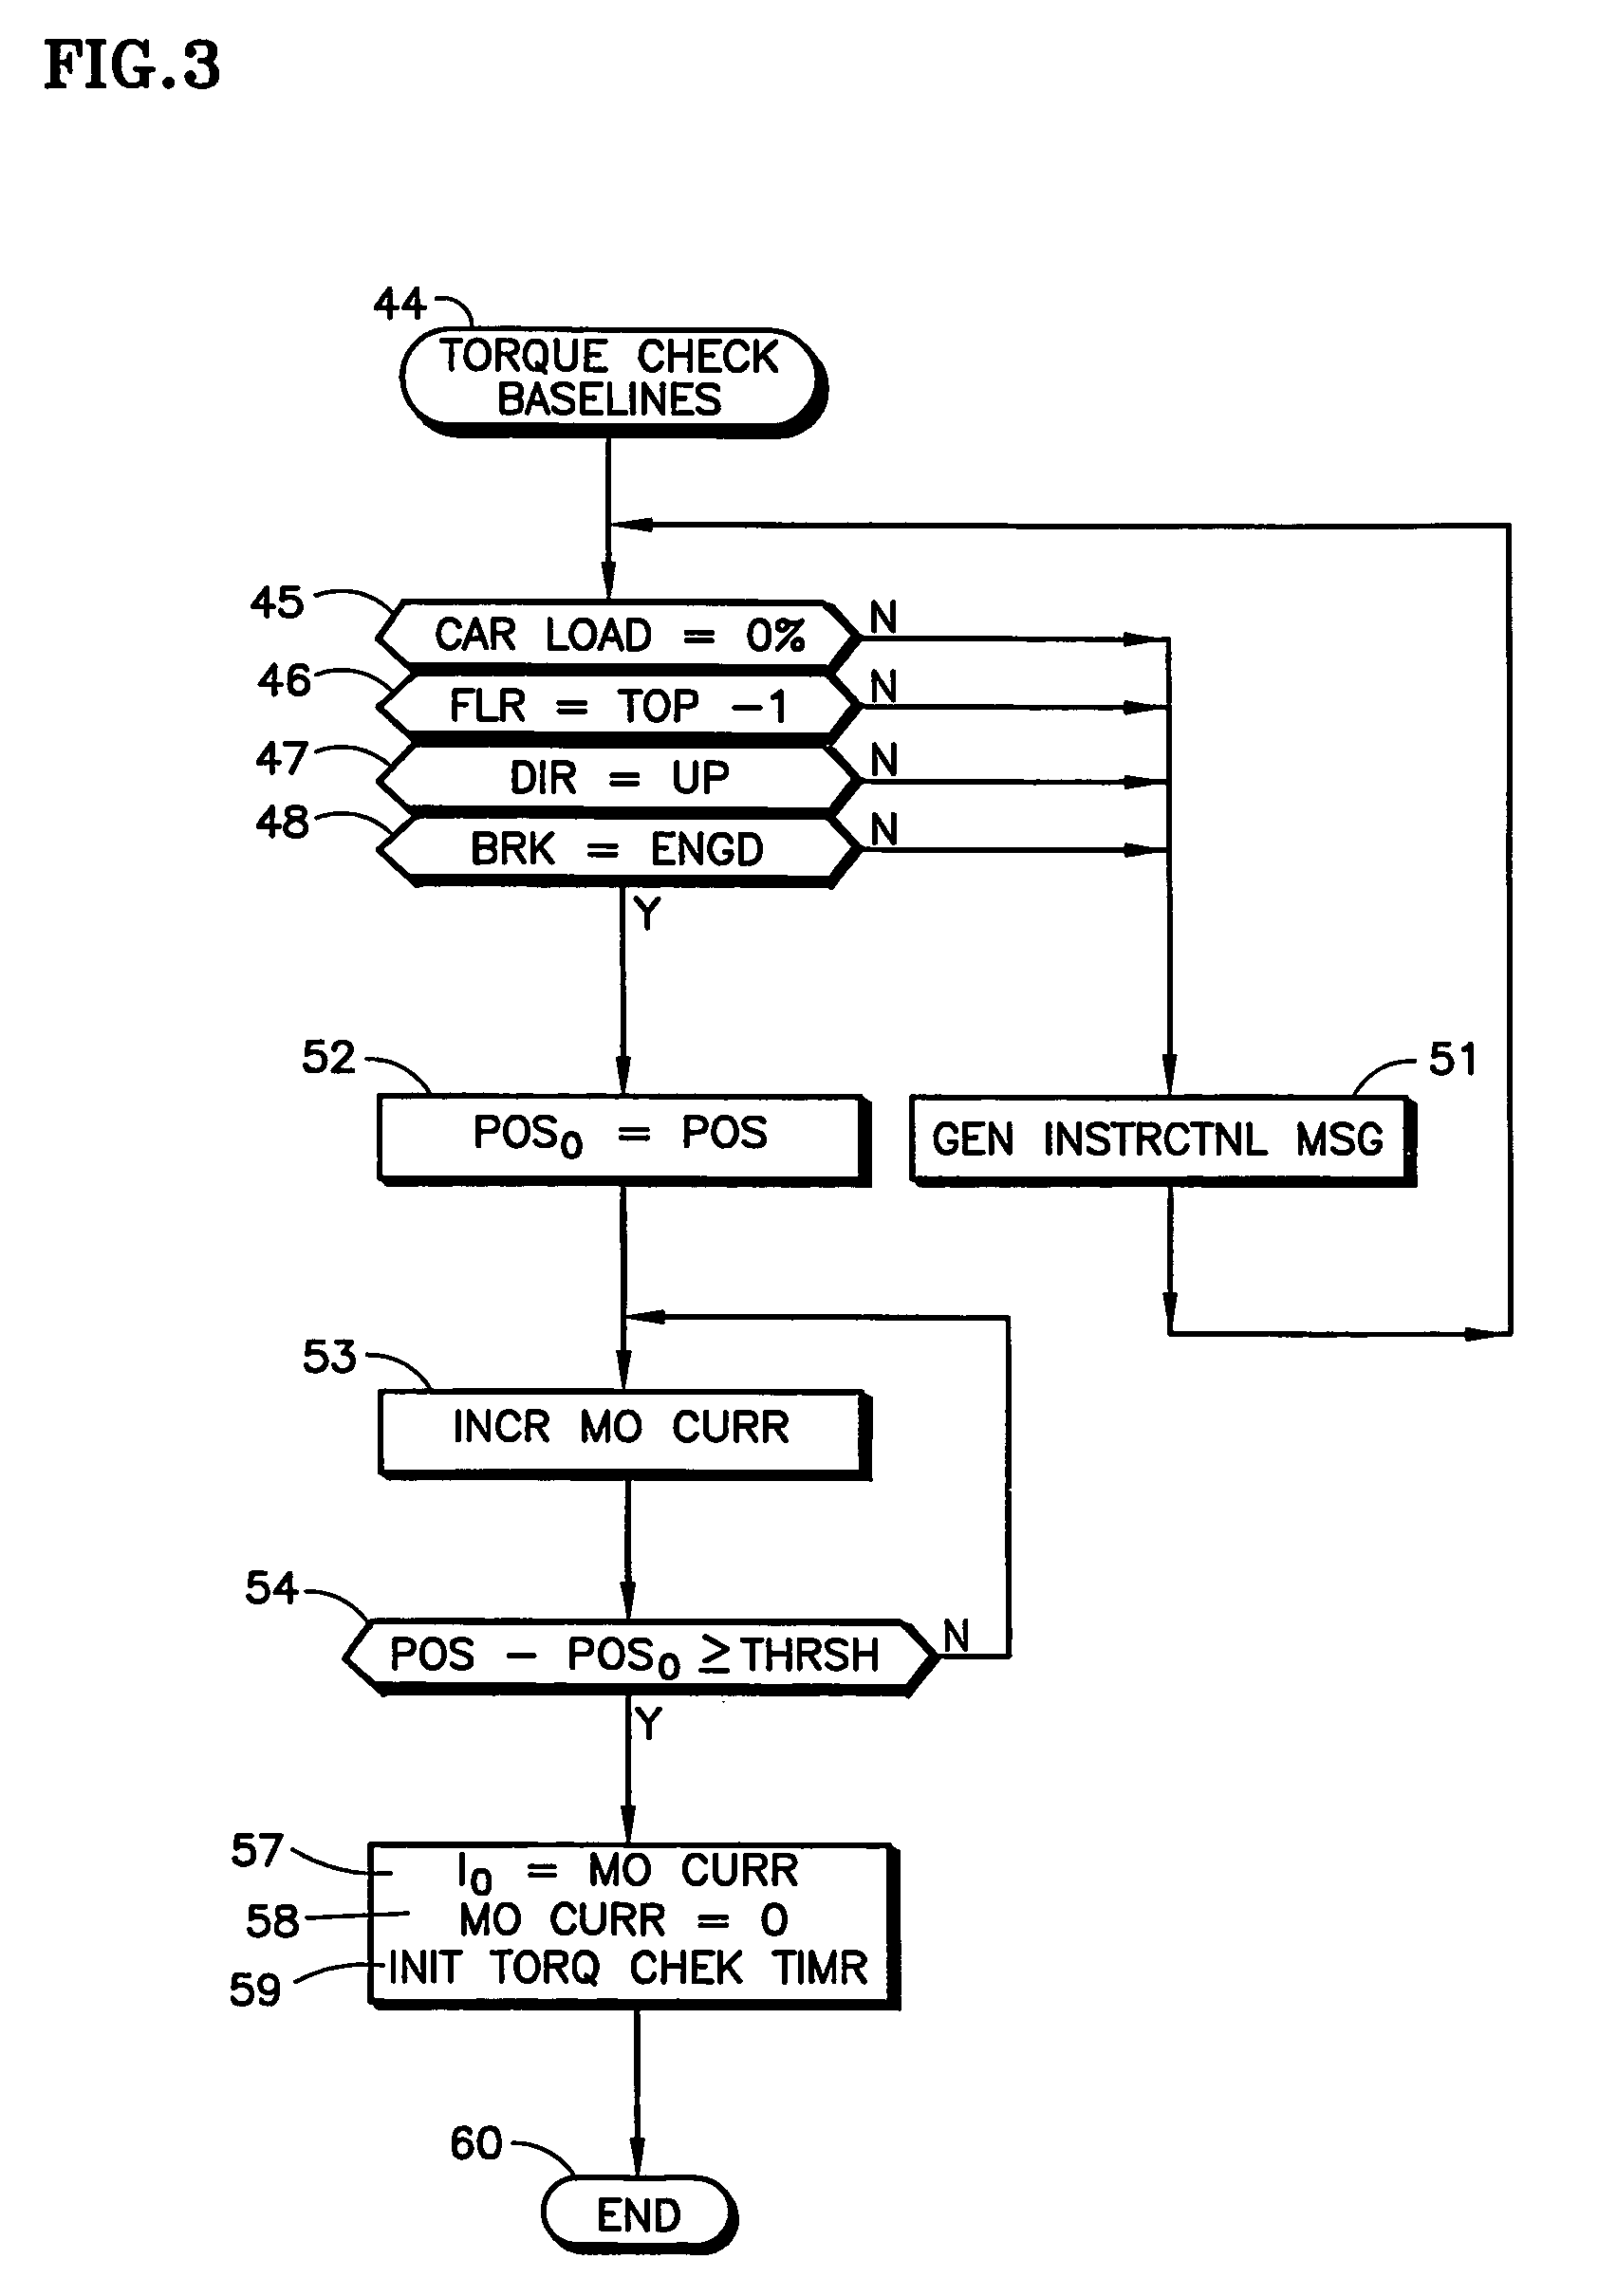 Detecting elevator brake and other dragging by monitoring motor current